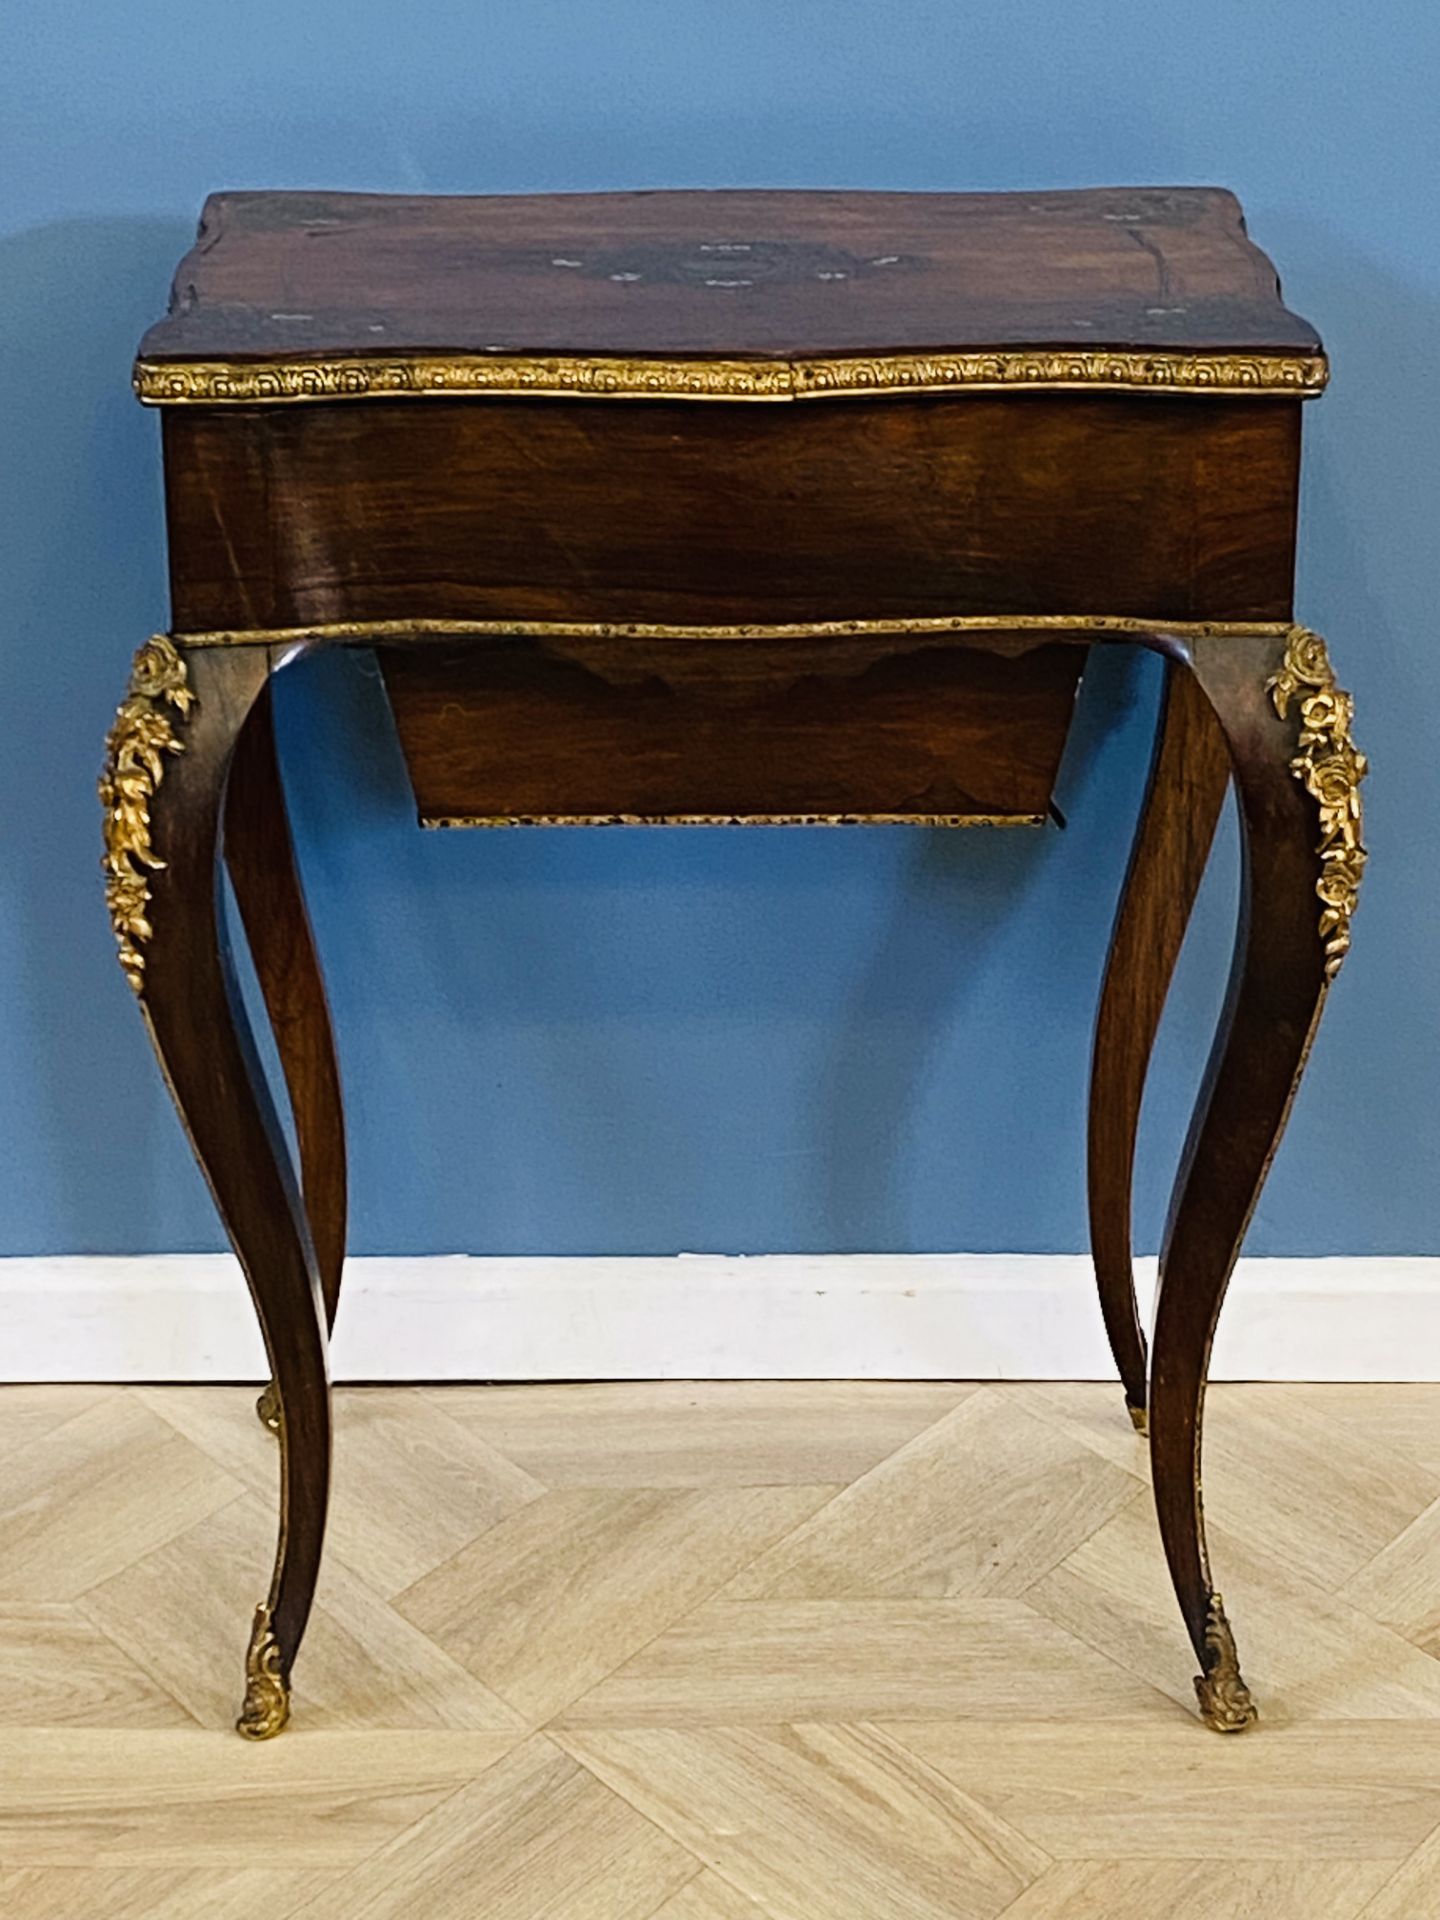 19th century rosewood with brass inlay ladies work table - Image 4 of 8